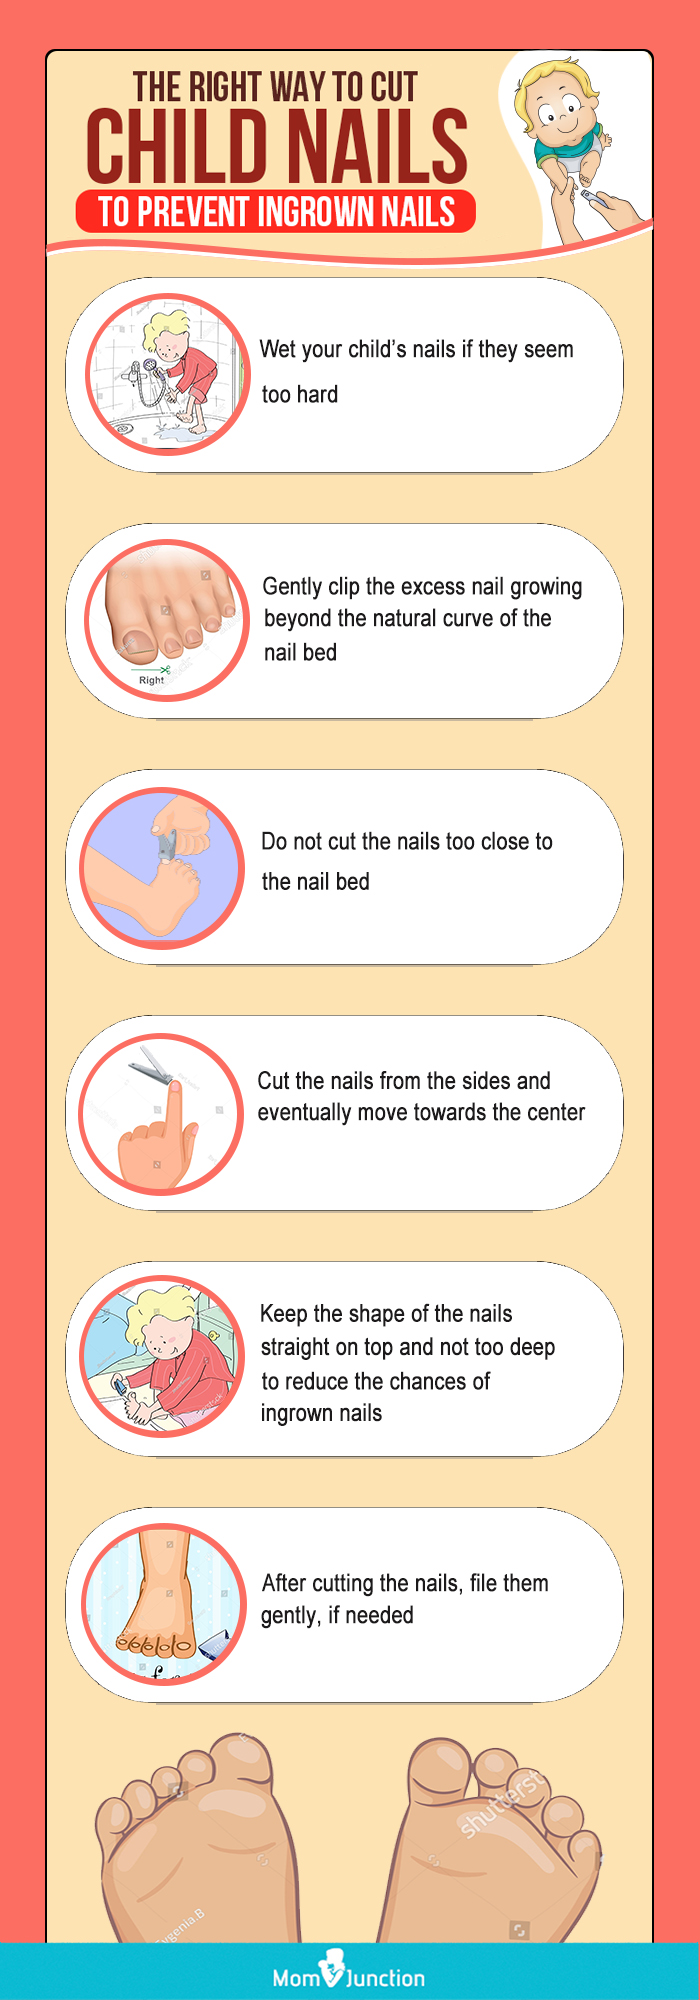 guide to cutting a childs nails [infographic]